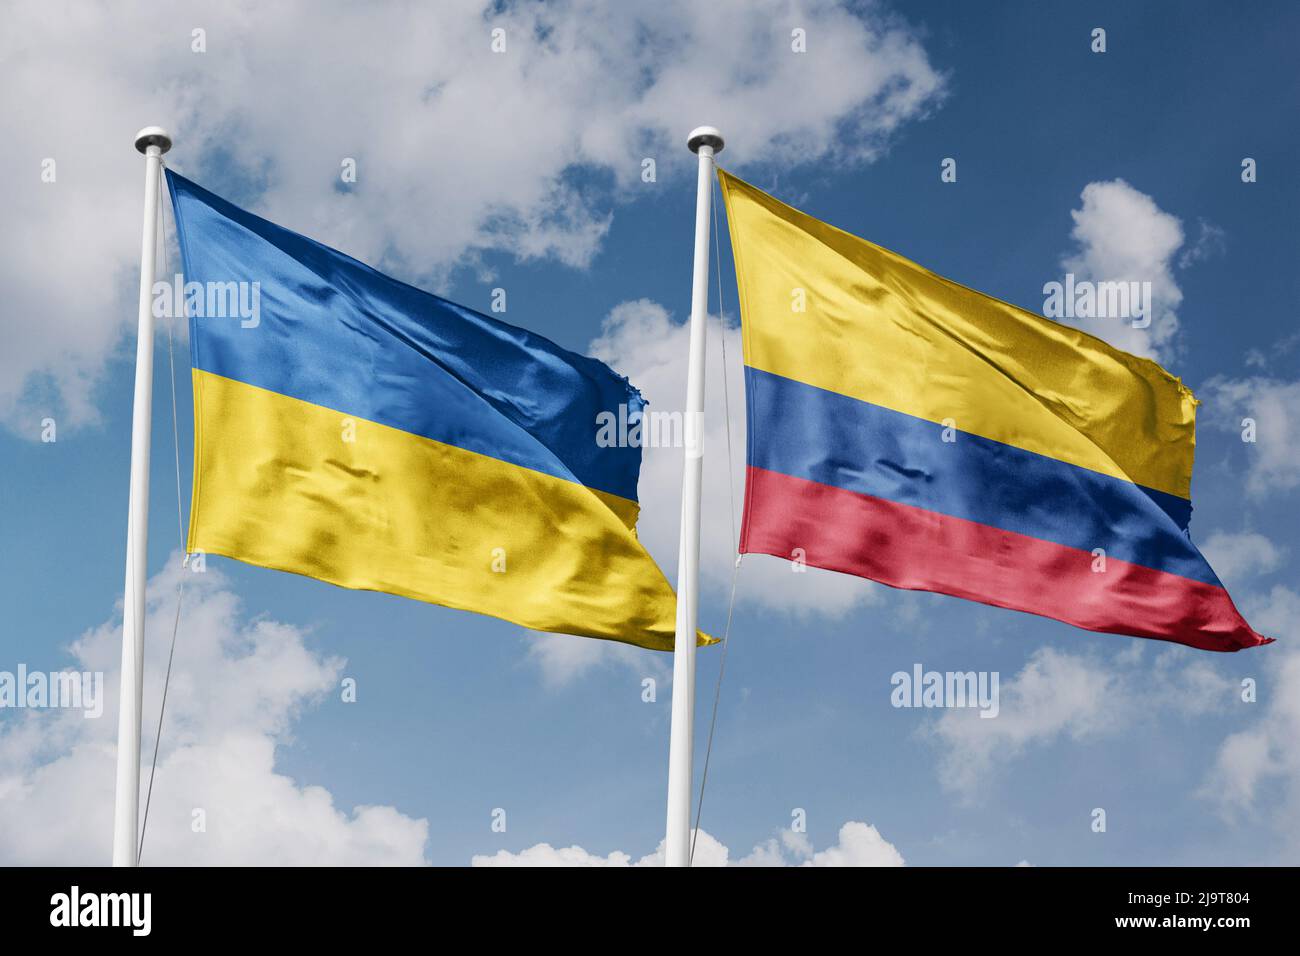 Ukraine and Colombia two flags on flagpoles and blue cloudy sky background Stock Photo